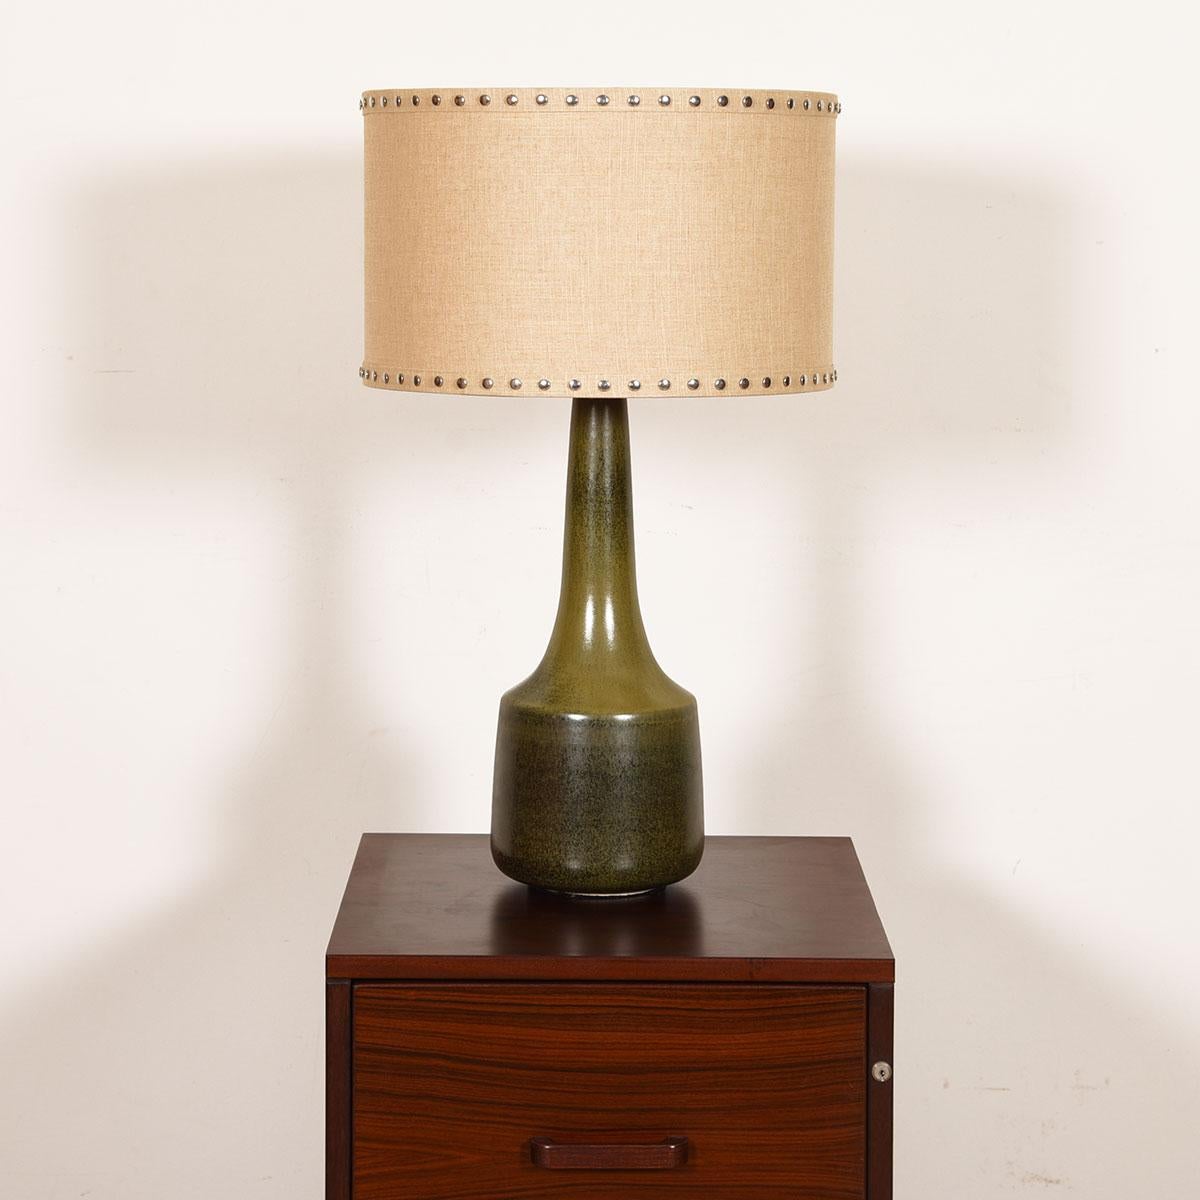 Ceramic midcentury Table Lamp by Bostlund

Additional information:
Material: Ceramic
Featured at Kensington
From Bostlund of Sweden, the beautiful form and beautiful medium mossy green finish on the pottery combine to make this a gracious lamp